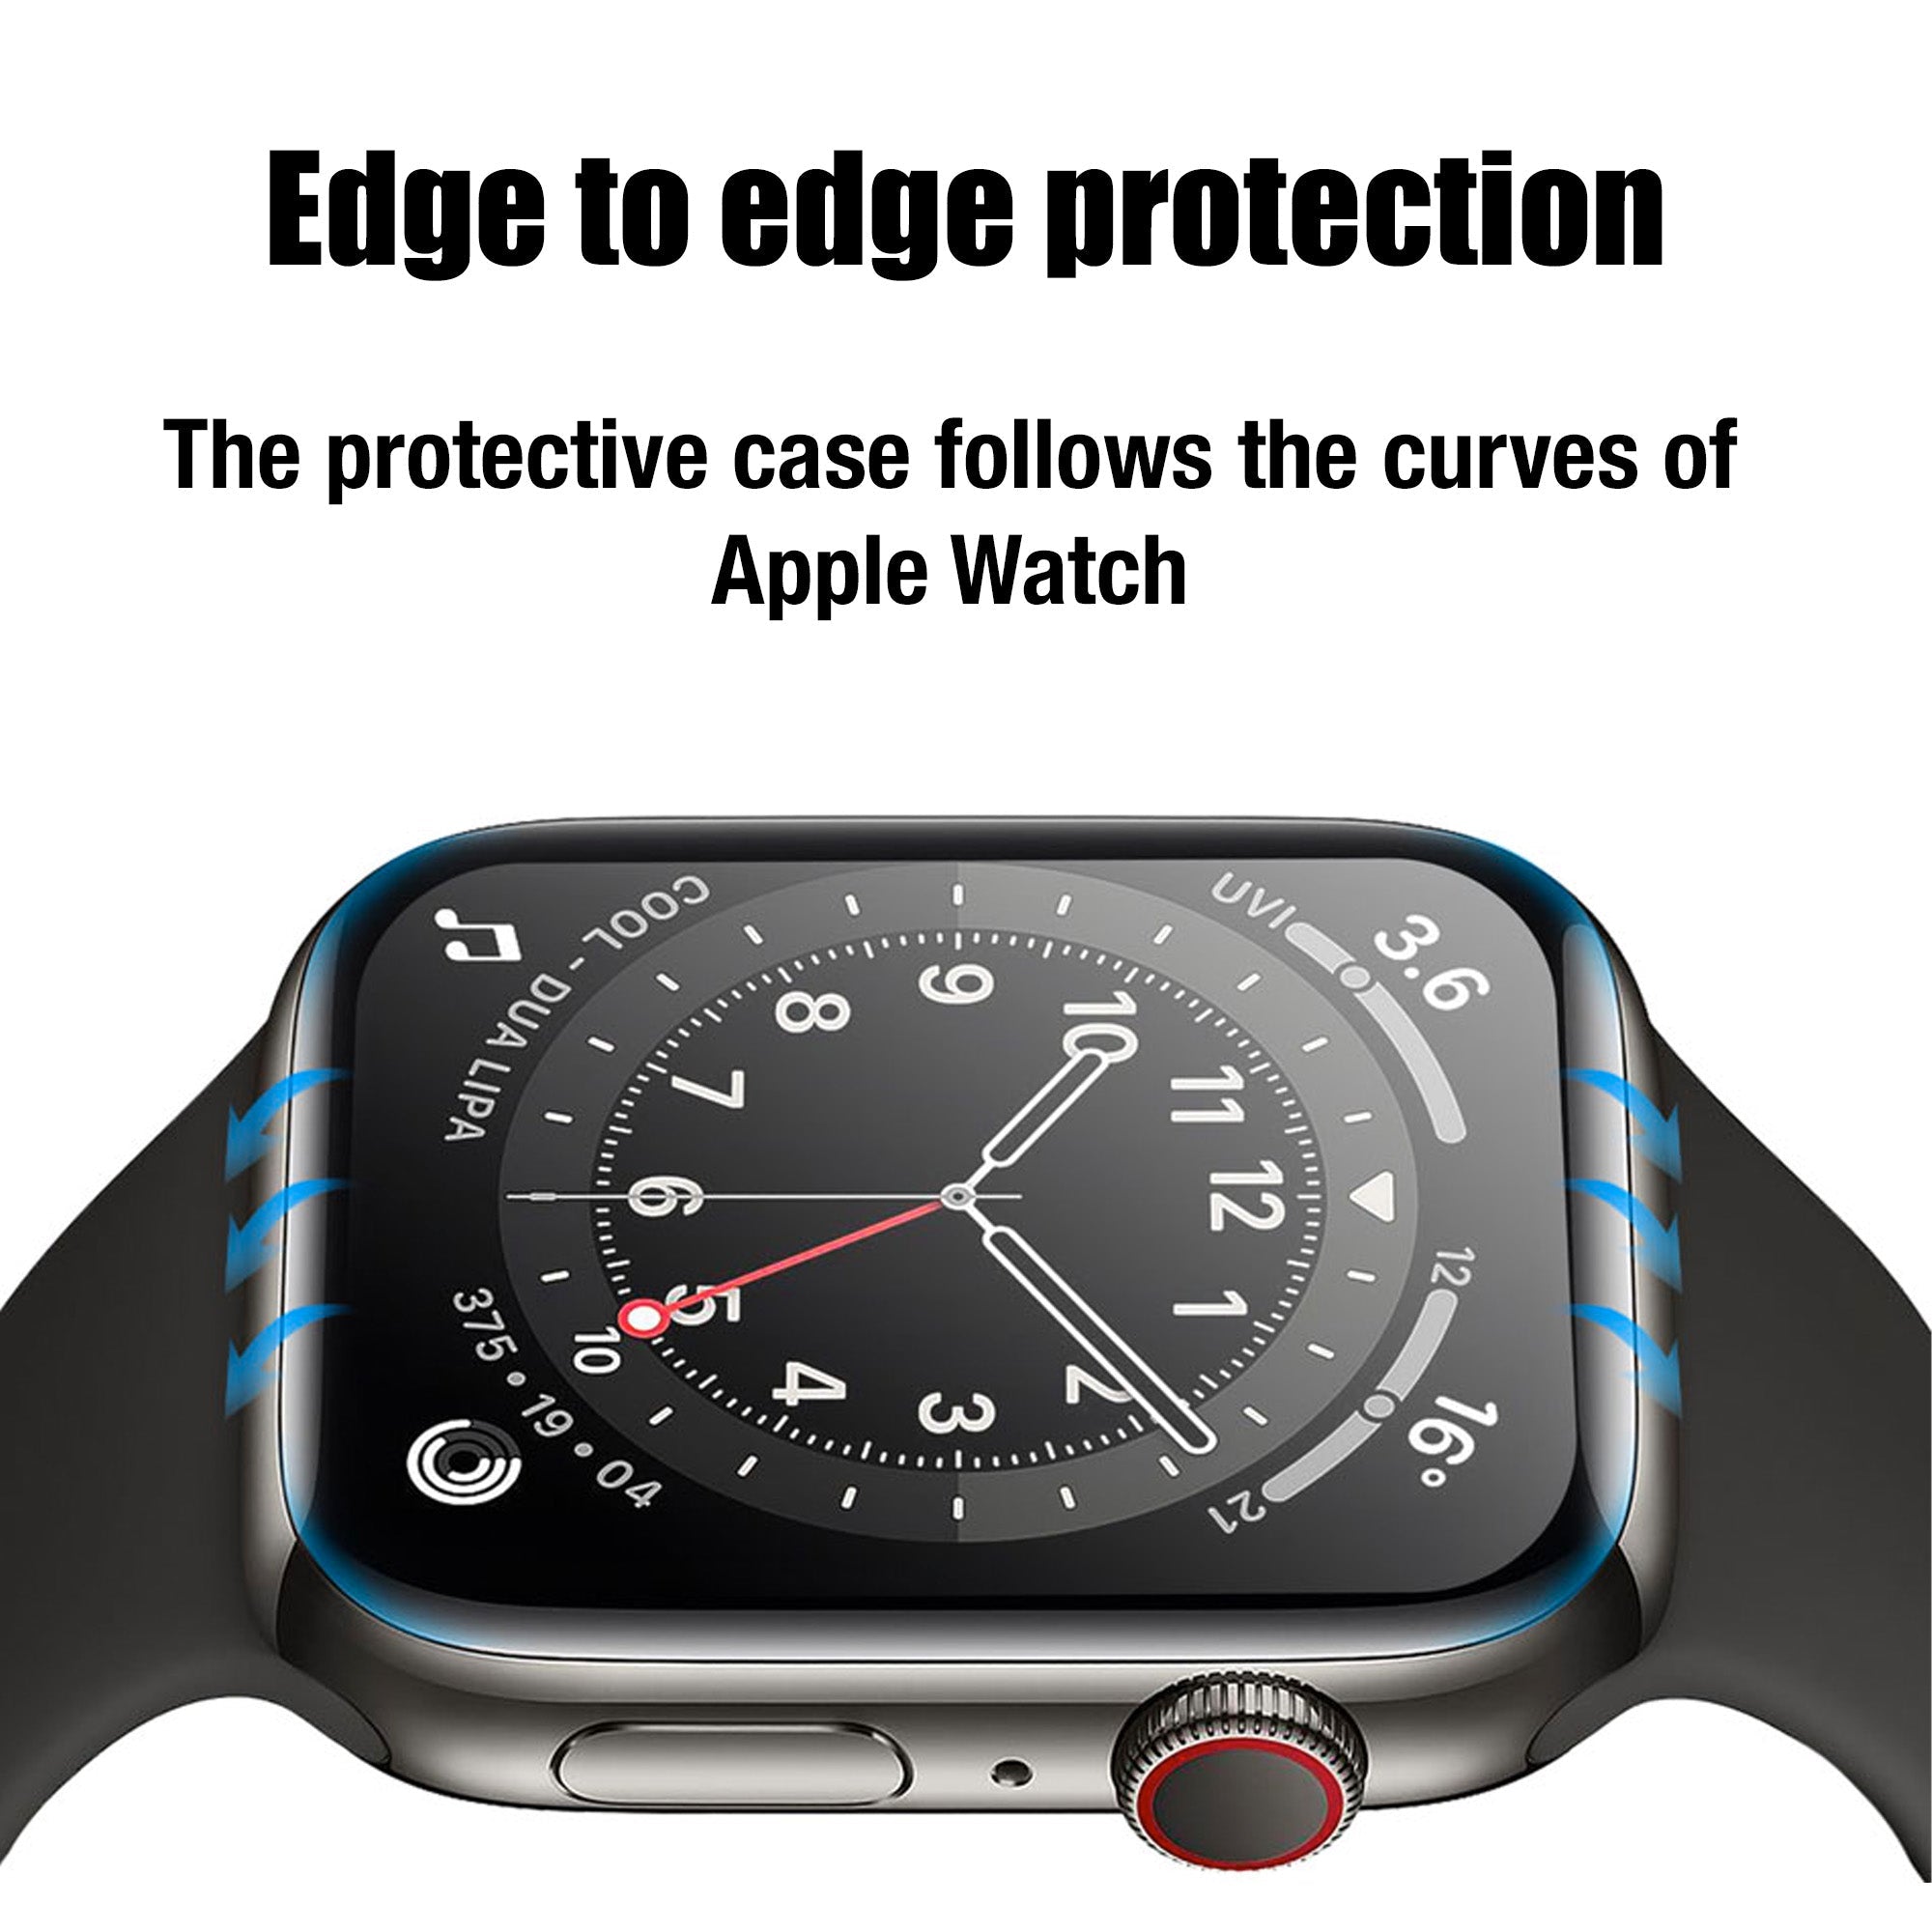 Screen Protector for Apple Watch Series 7 6 5 4 3 2 1 & SE, Curved Edge Anti-Scratch Bubble-Free 3D Ultra Shatterproof Flexible Protector Film    Accessories Gifts UK